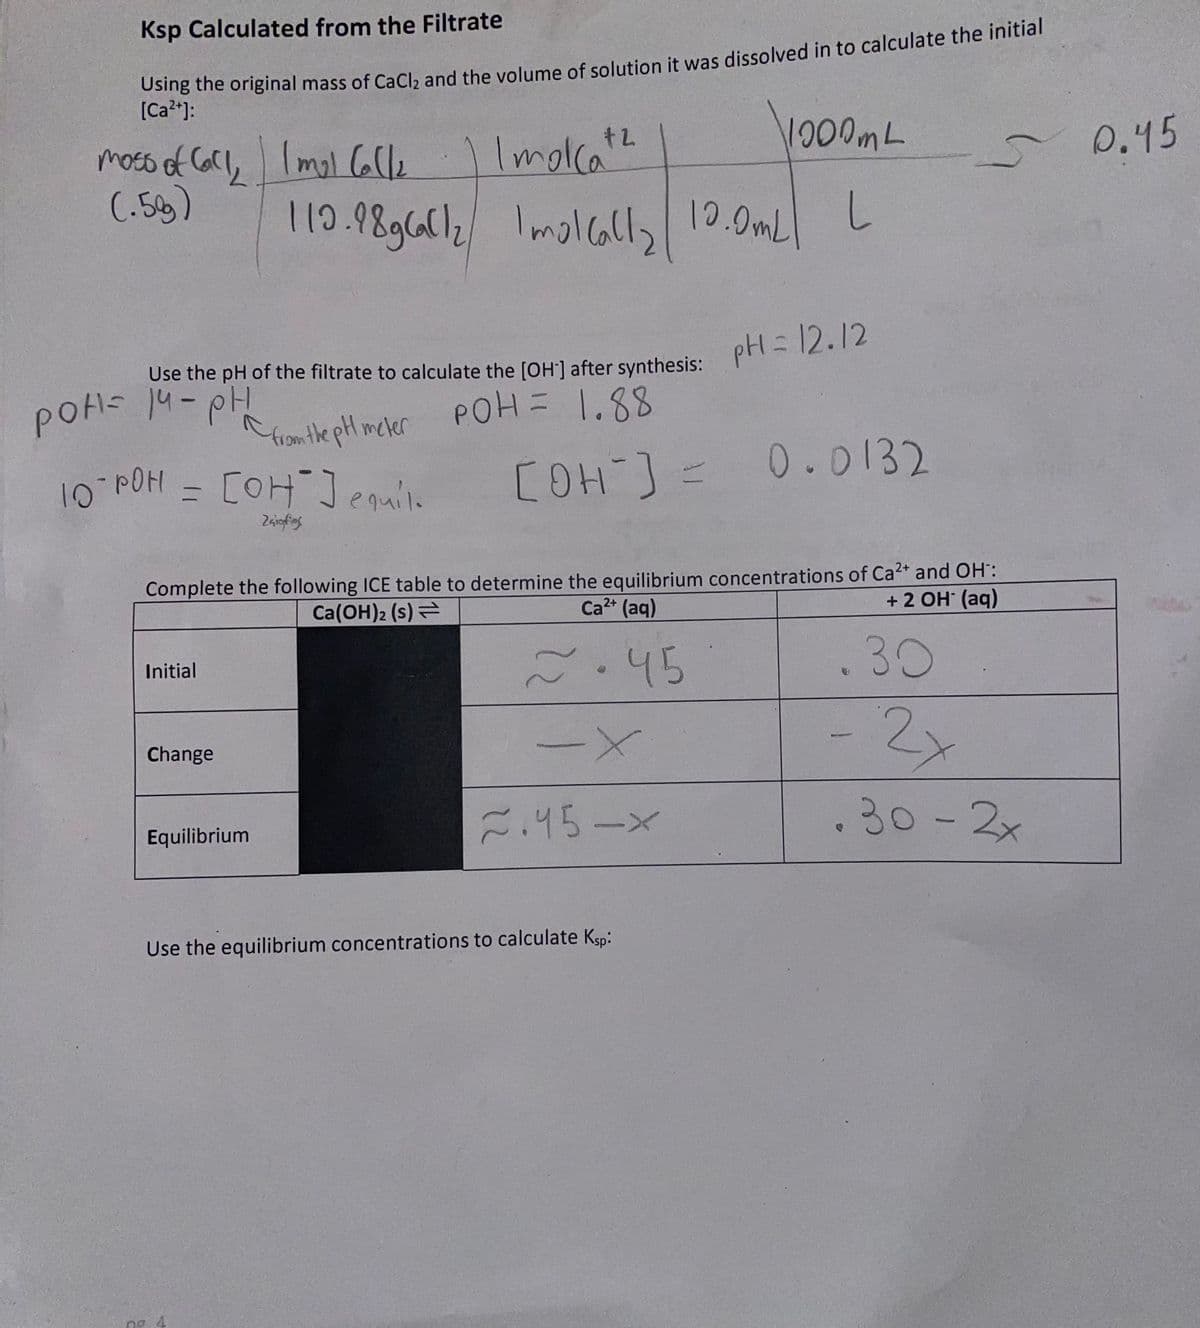 Ksp Calculated from the Filtrate
Using the original mass of CaCl₂ and the volume of solution it was dissolved in to calculate the initial
[Ca²+]:
moss of Call, Imol Calle
(.5%)
рон 14-рн
from the pH meter
10-POH = [OH-] equílo
Zsigfios
Use the pH of the filtrate to calculate the [OH-] after synthesis:
POH = 1.88
Initial
119.98g6al12
Change
Equilibrium
Imolatz
Imolcalla
ng 4
10.0mL
[OH-] =
Use the equilibrium concentrations to calculate Ksp:
1000mL
L
Complete the following ICE table to determine the equilibrium concentrations of Ca²+ and OH:
+ 2 OH* (aq)
Ca(OH)2 (s) =
Ca²+ (aq)
2.45
.30
- 2x
-X
2.45-x
.30-2x
pH = 12.12
0.0132
S
0.45